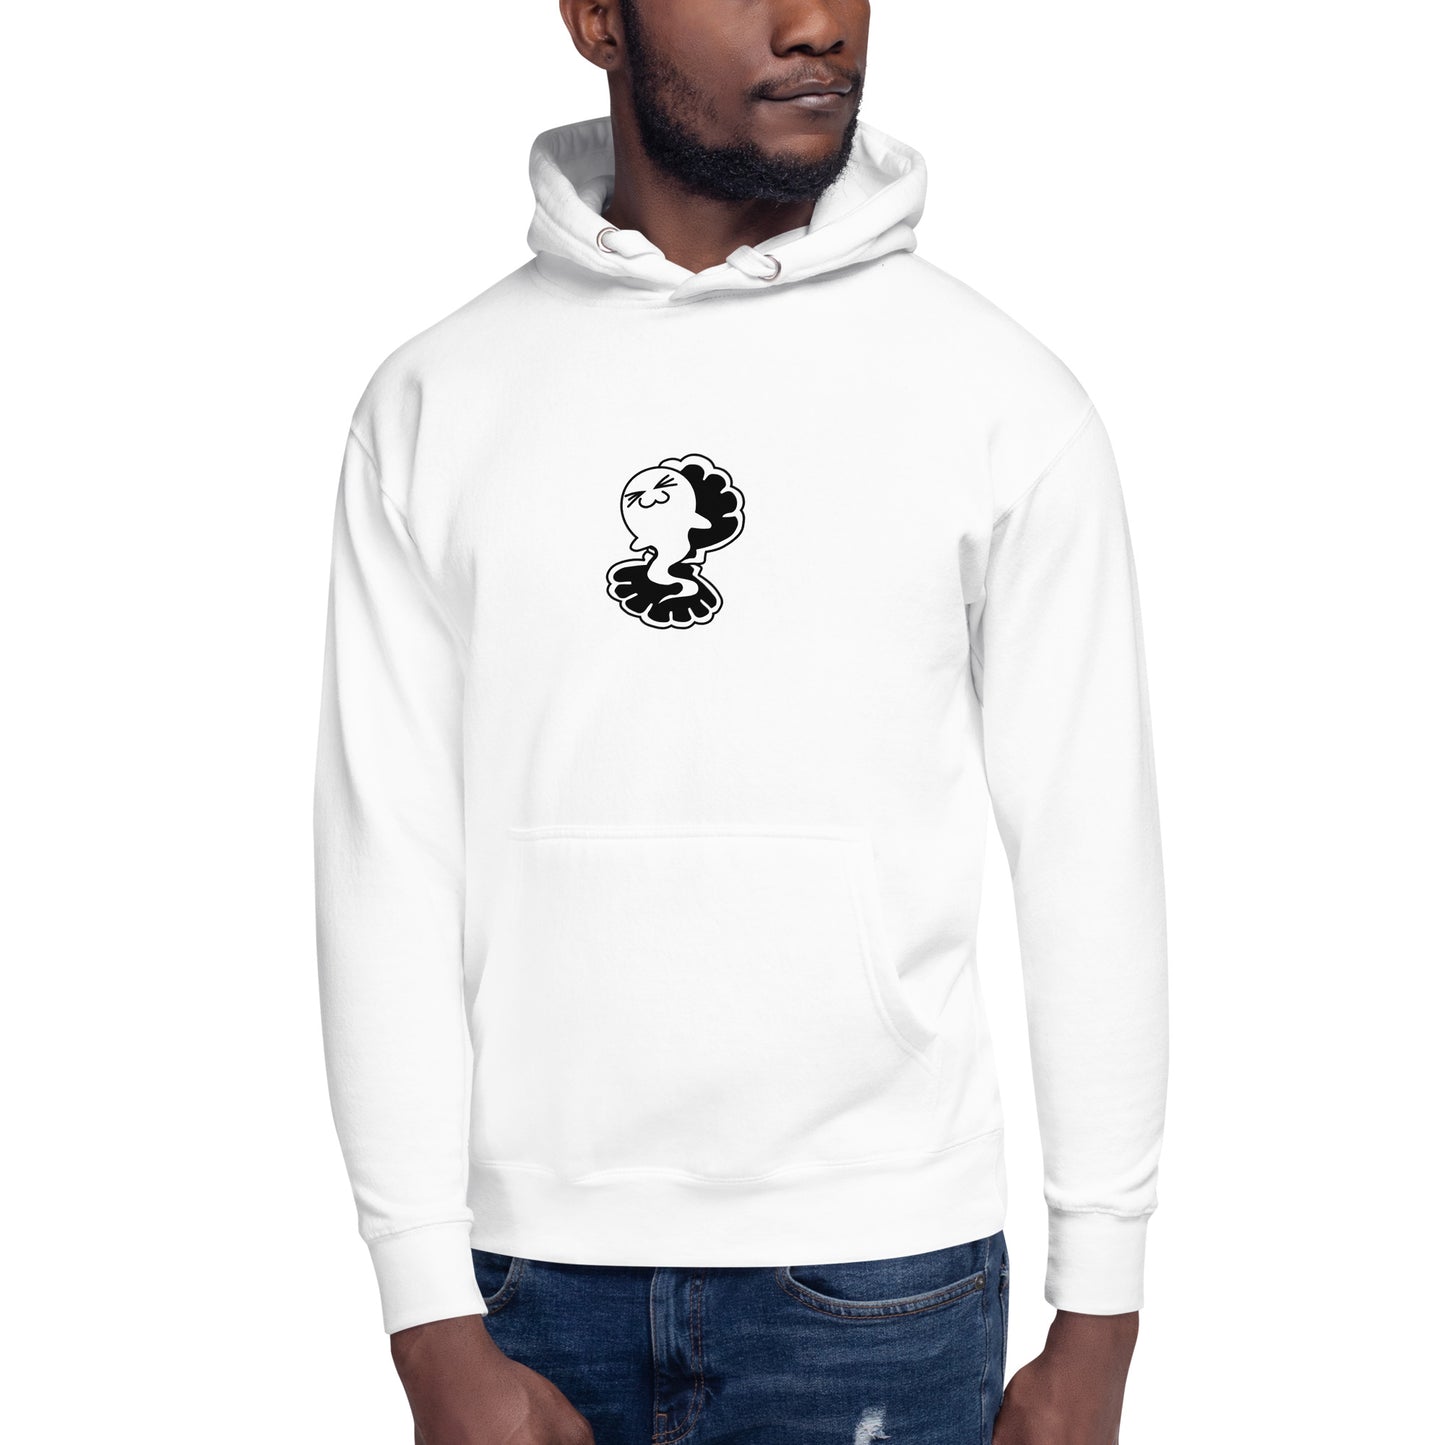 Judys Ghost in the Shell Tattoo Hoodie (Unisex)